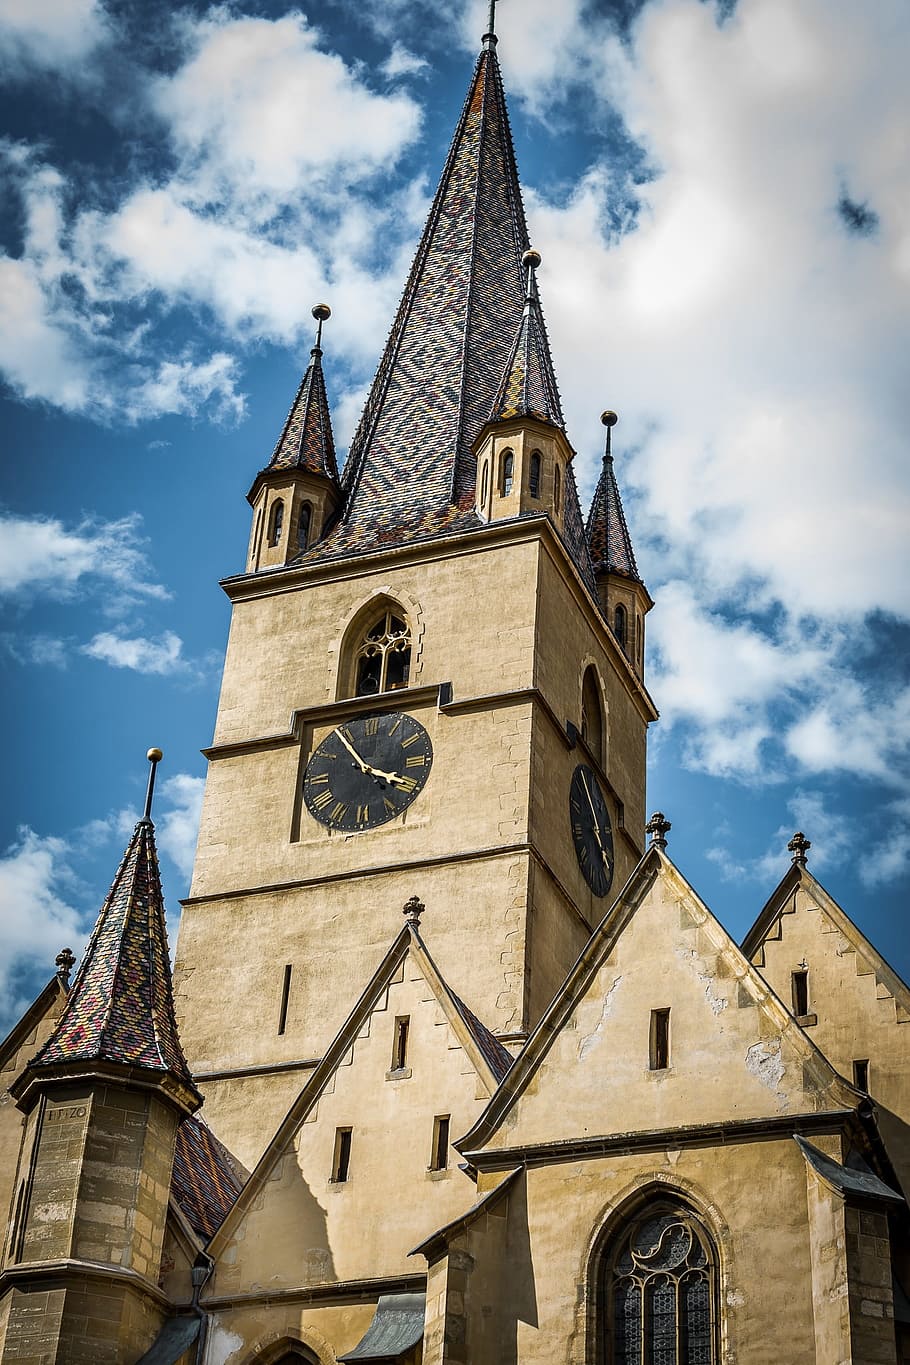 architecture, building, infrastructure, blue, sky, clouds, church, cathedral, built structure, place of worship